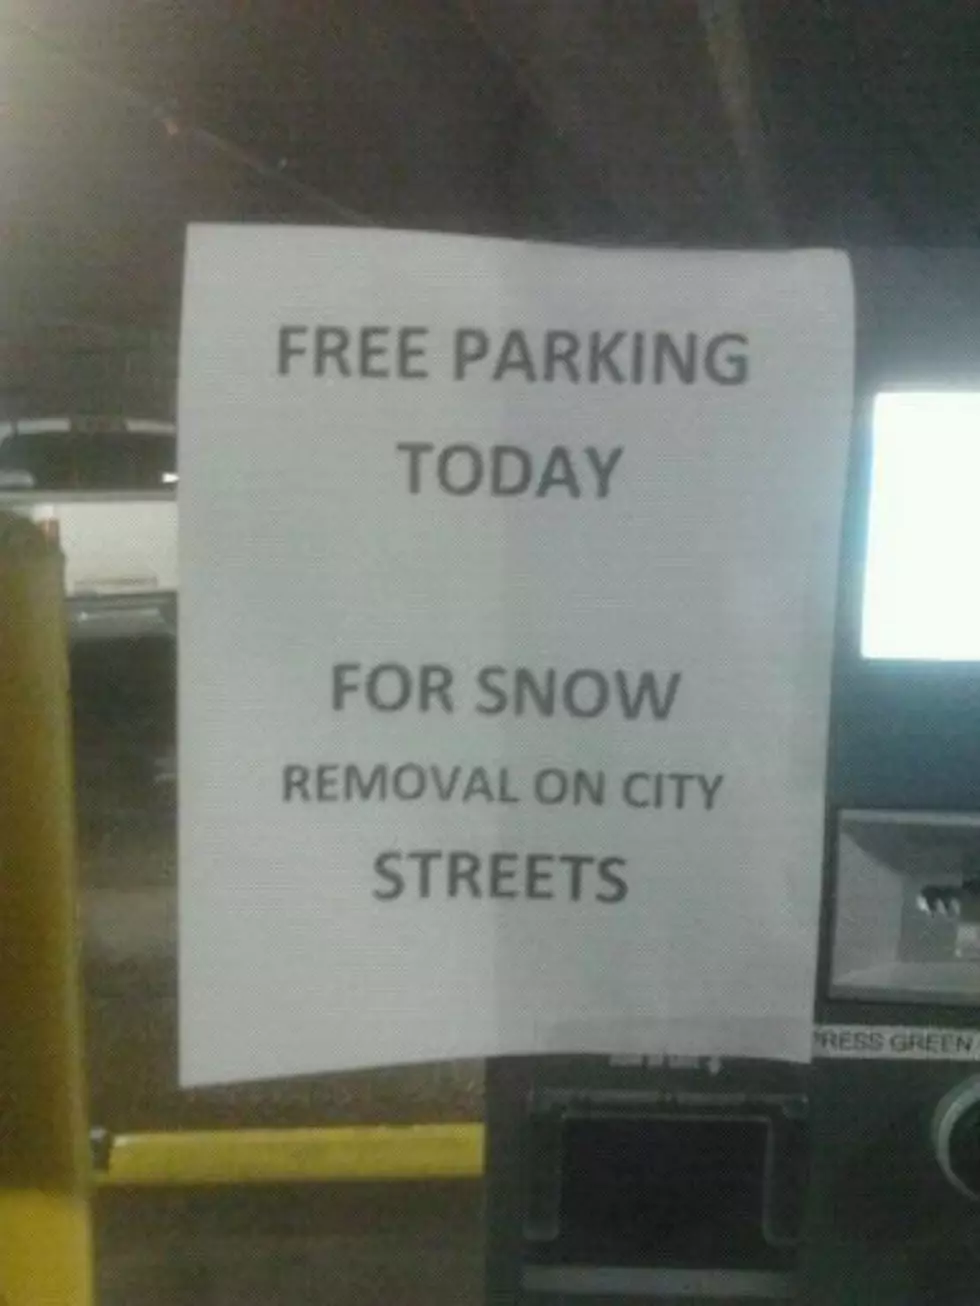 Downtown Boise Parking is FREE Due to Snow